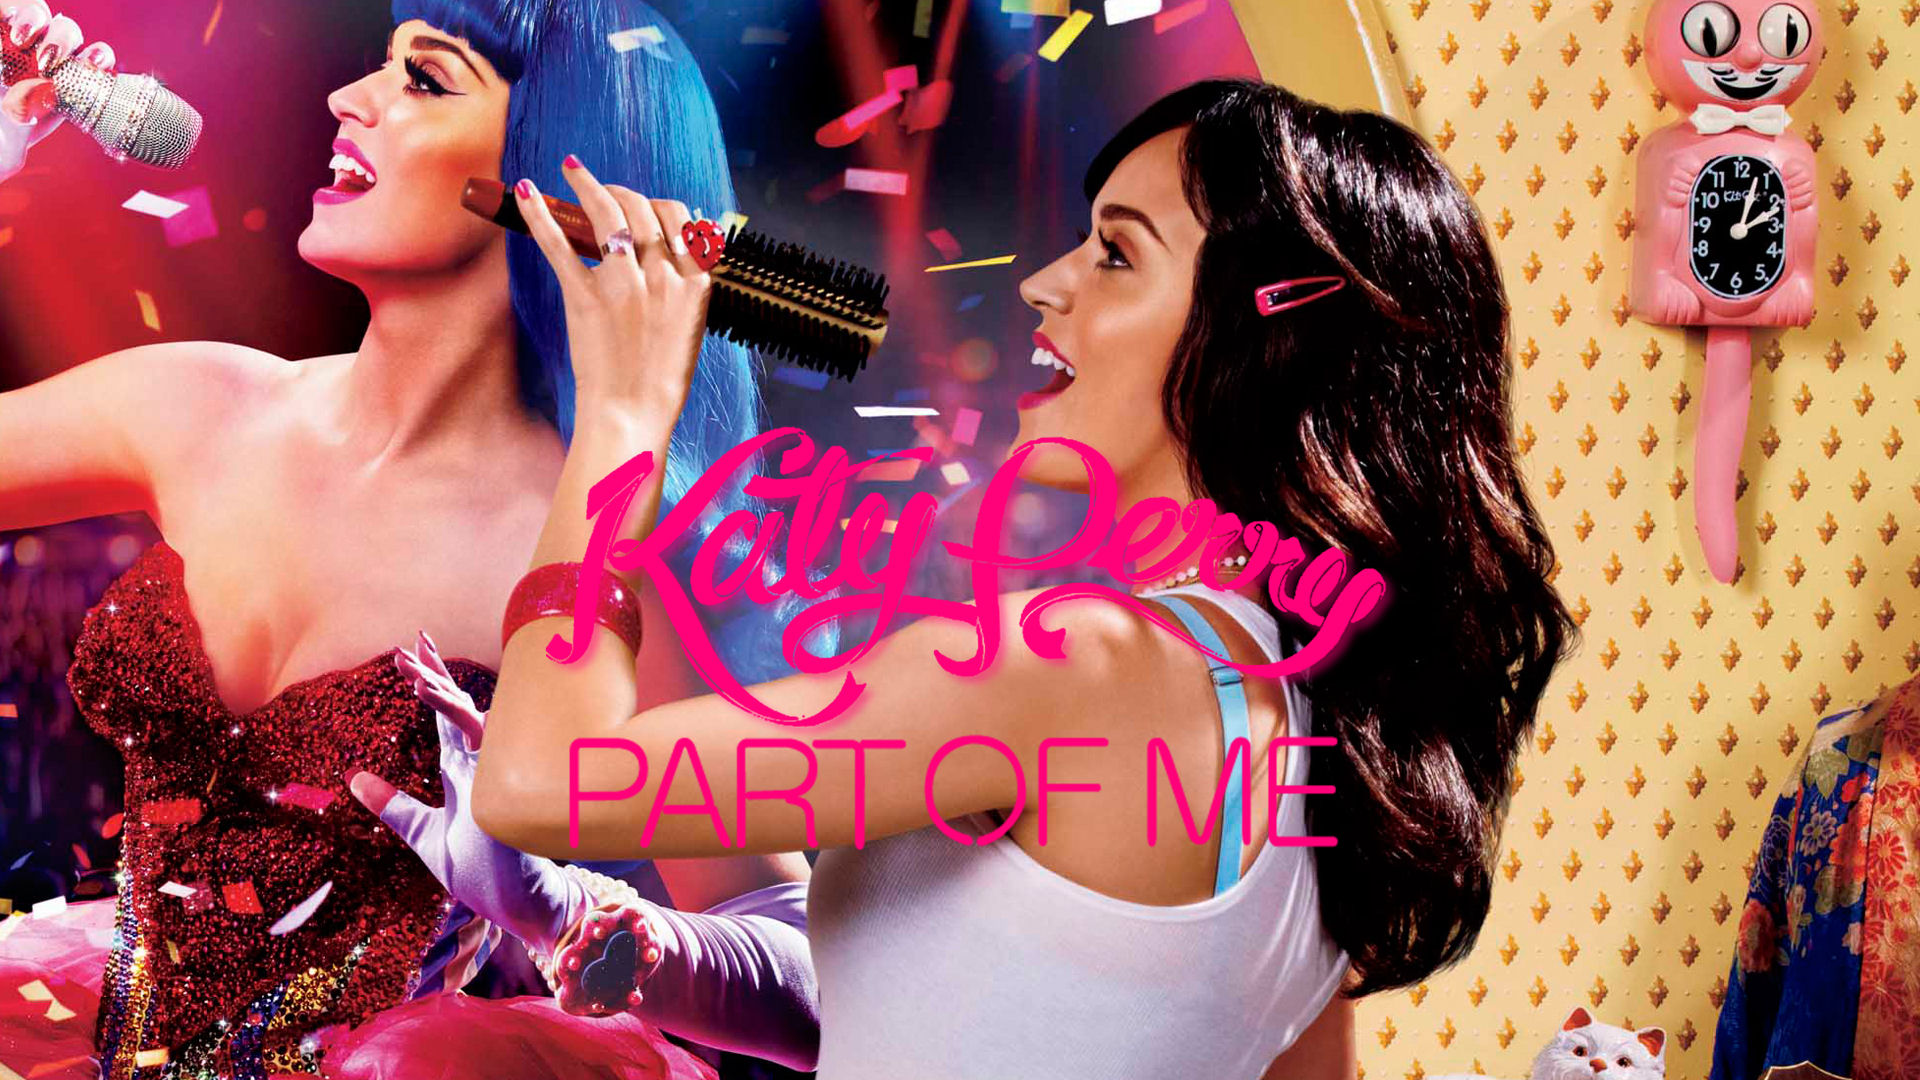 Katy Perry Part of Me - Katy Perry Wallpaper (36347635) - Fanpop